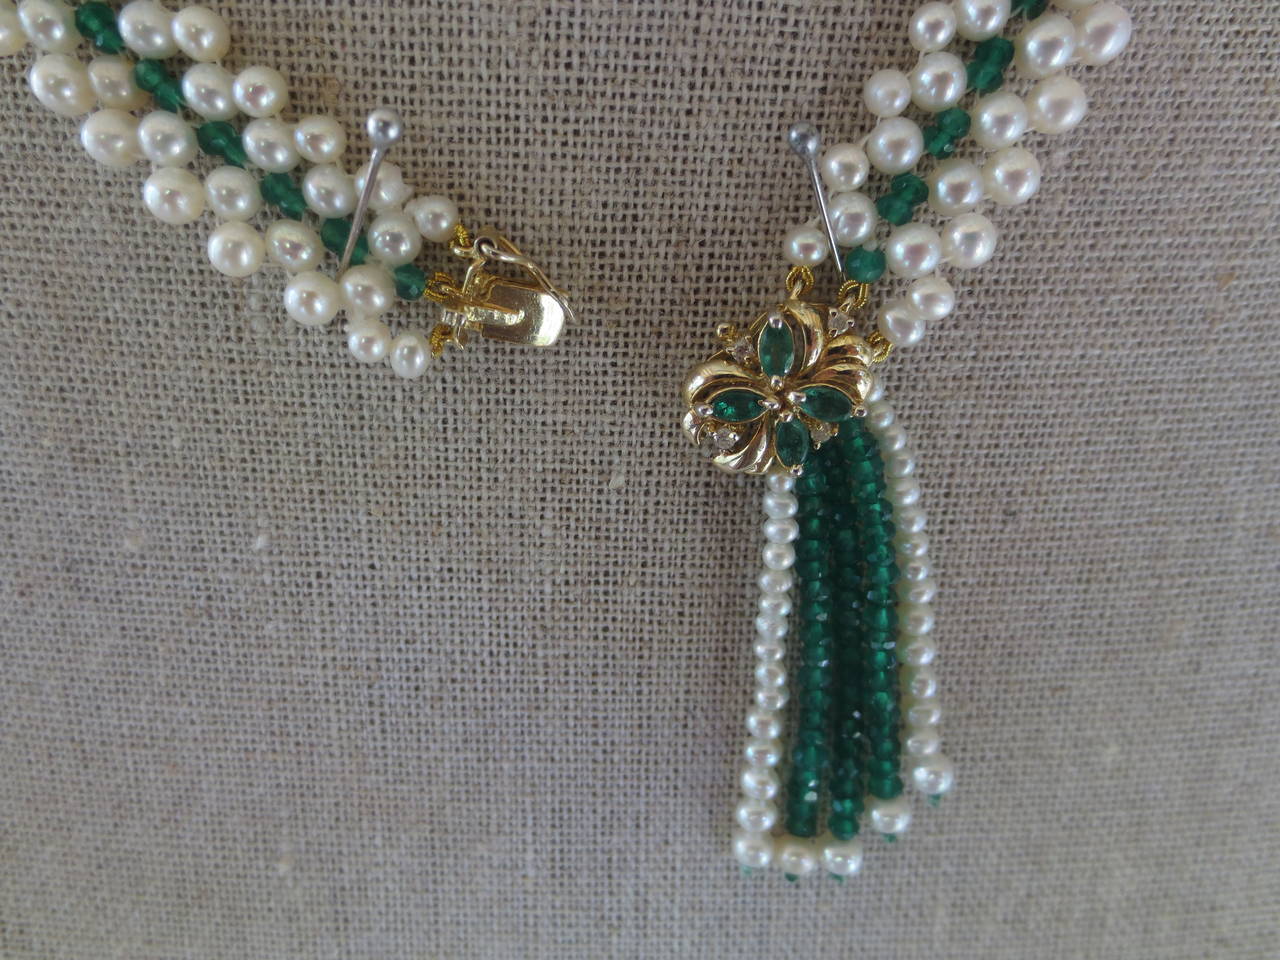 Artist  Marina J. Woven Pearl & Emerald Necklace with 14k Yellow Gold Centerpiece-Clasp